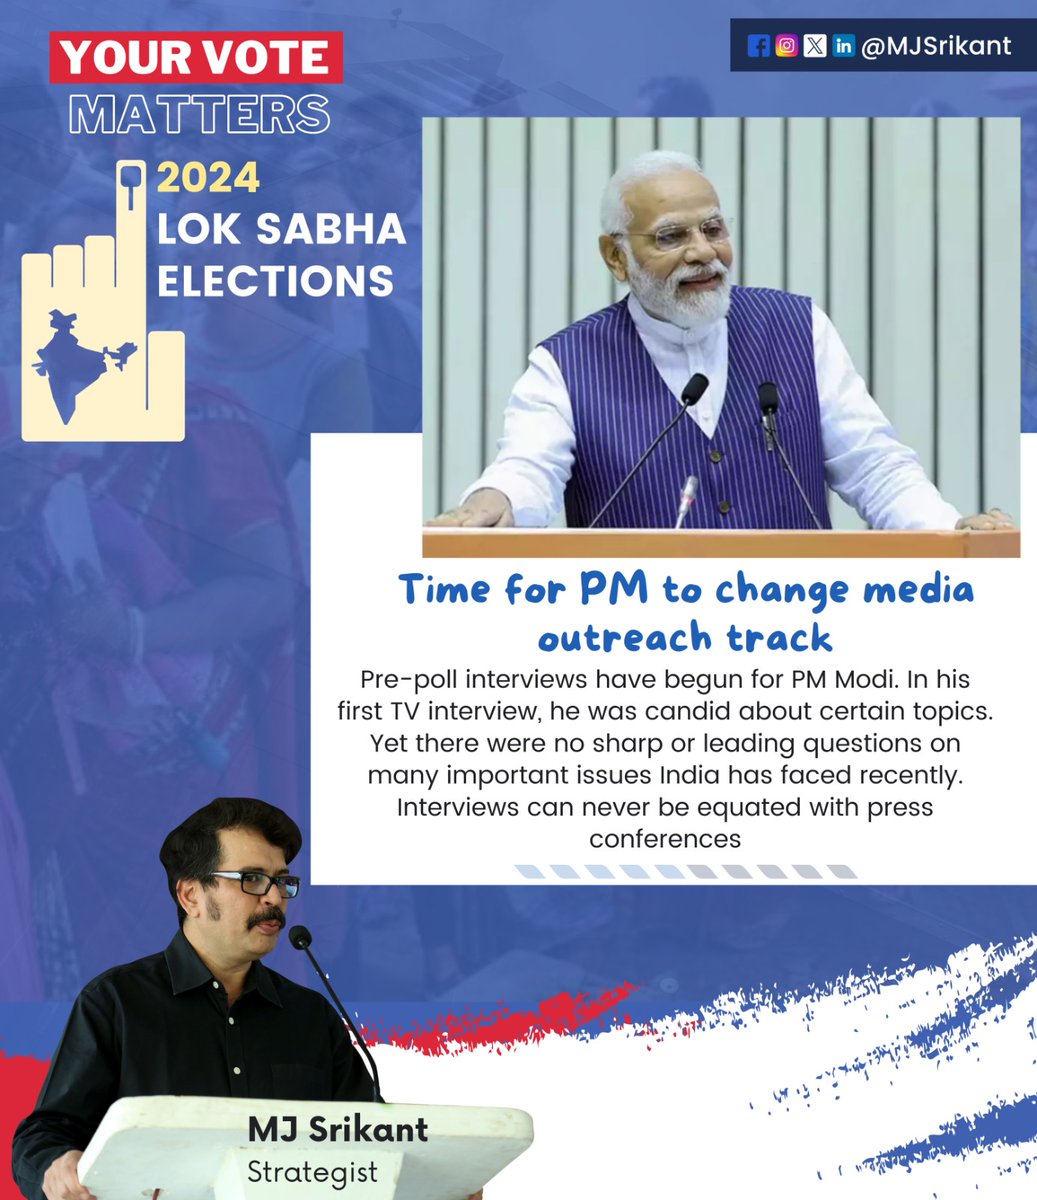 Time for PM to change media outreach track

#MediaOutreach #PMModi #PrePollInterviews #SharpQuestions #LeadingQuestions #IndiaIssues #PressConferences #CandidInterviews #MediaTrack #ChangeNeeded